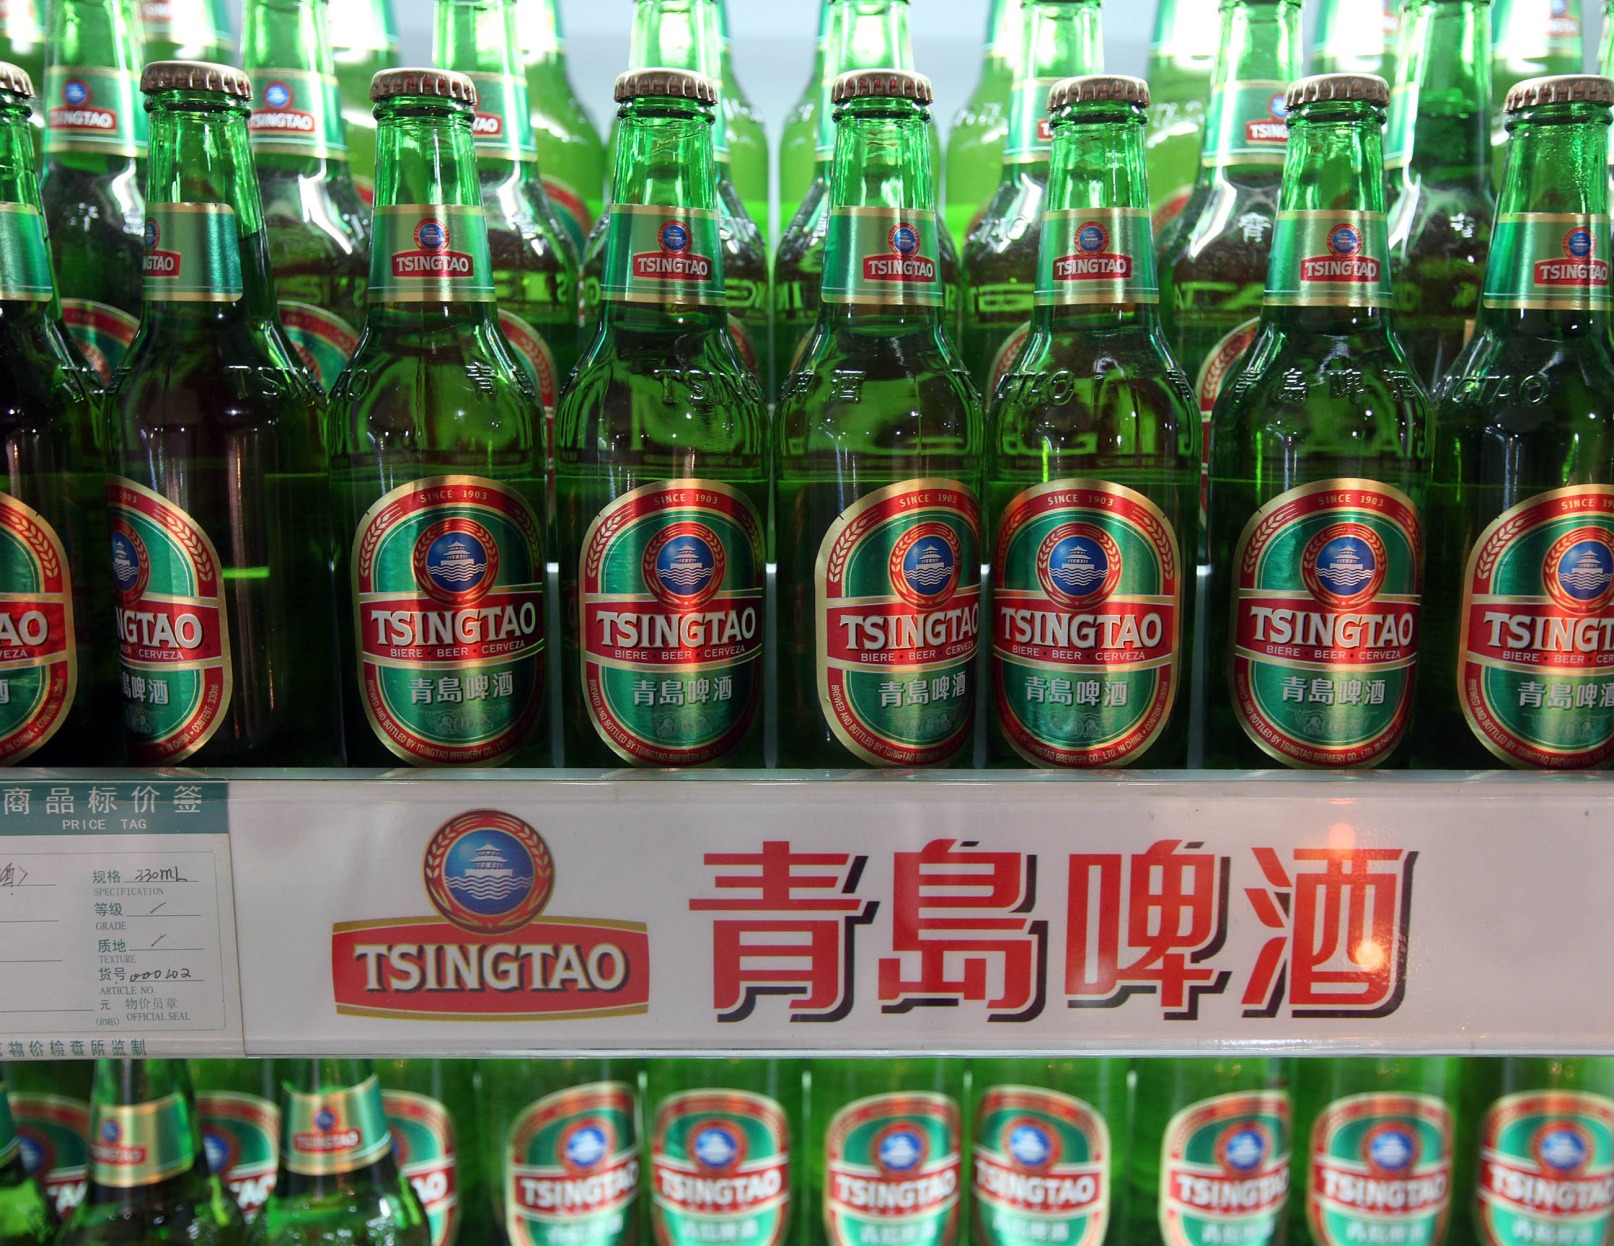 Bottles of beer are for sale at the Tsingtao Brewery Co. museum in Qingdao, China, on Monday, Aug. 16, 2010. Tsingtao Brewery Co. is a Chinese beer company founded by German settlers more than a century ago.